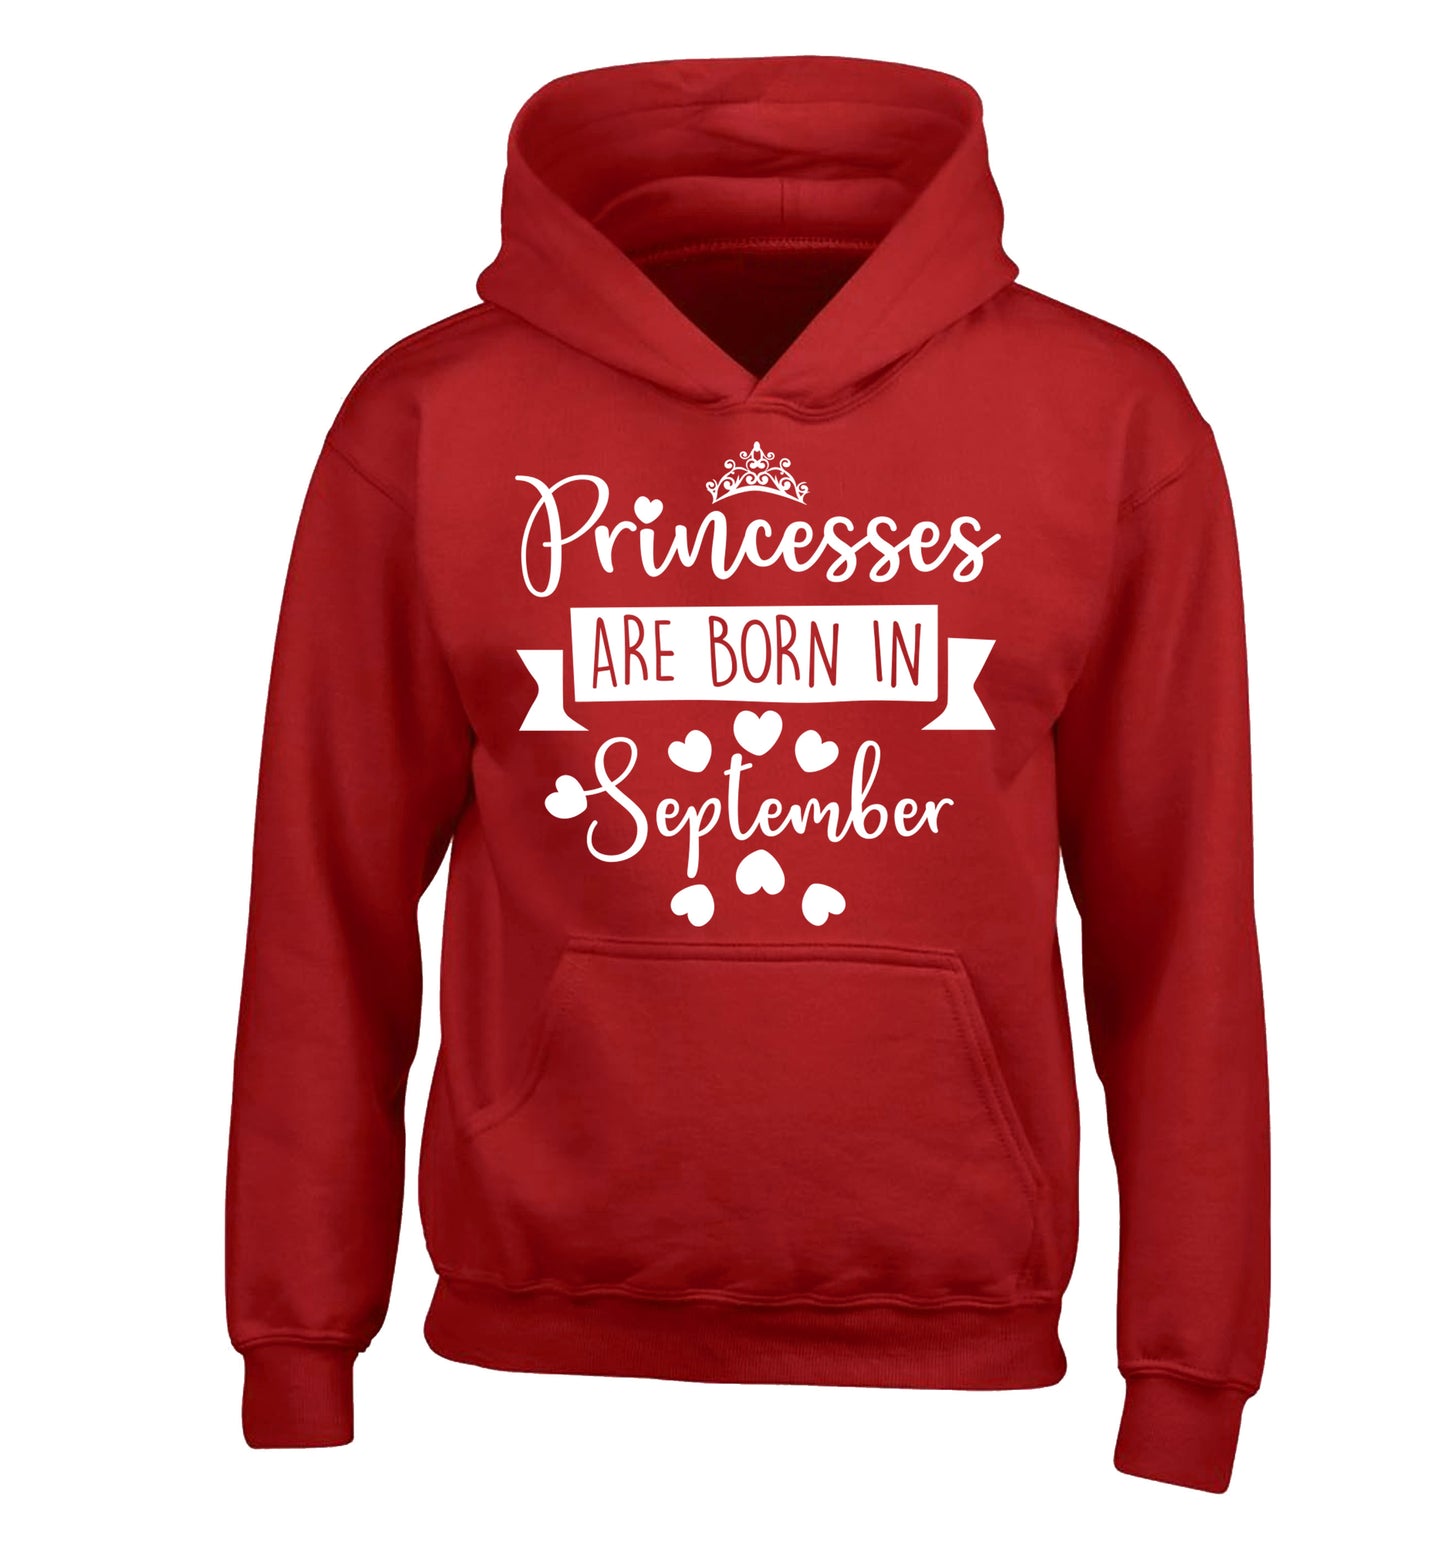 Princesses are born in September children's red hoodie 12-13 Years